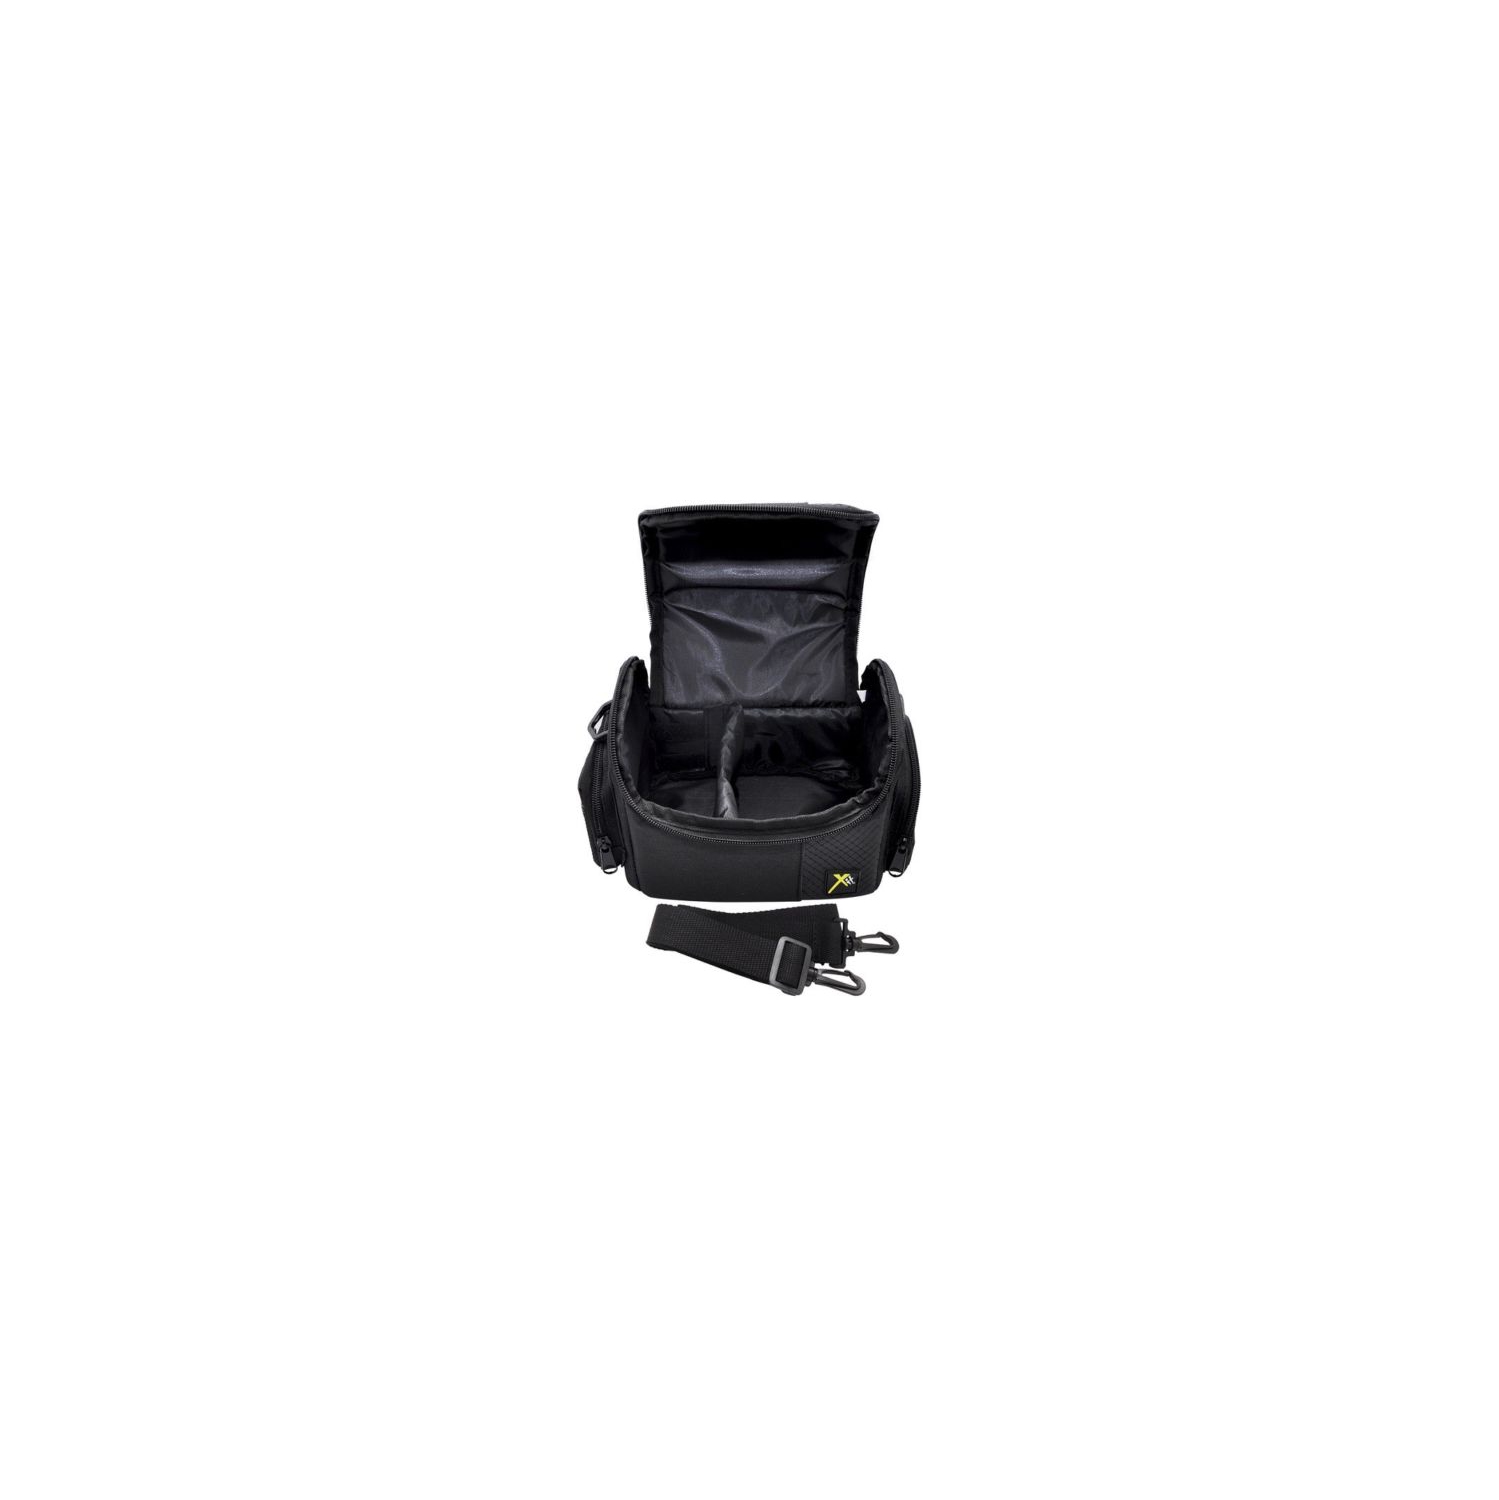 Digi Deluxe Carrying Case Camera Bag For Canon EOS M10 M5 M3